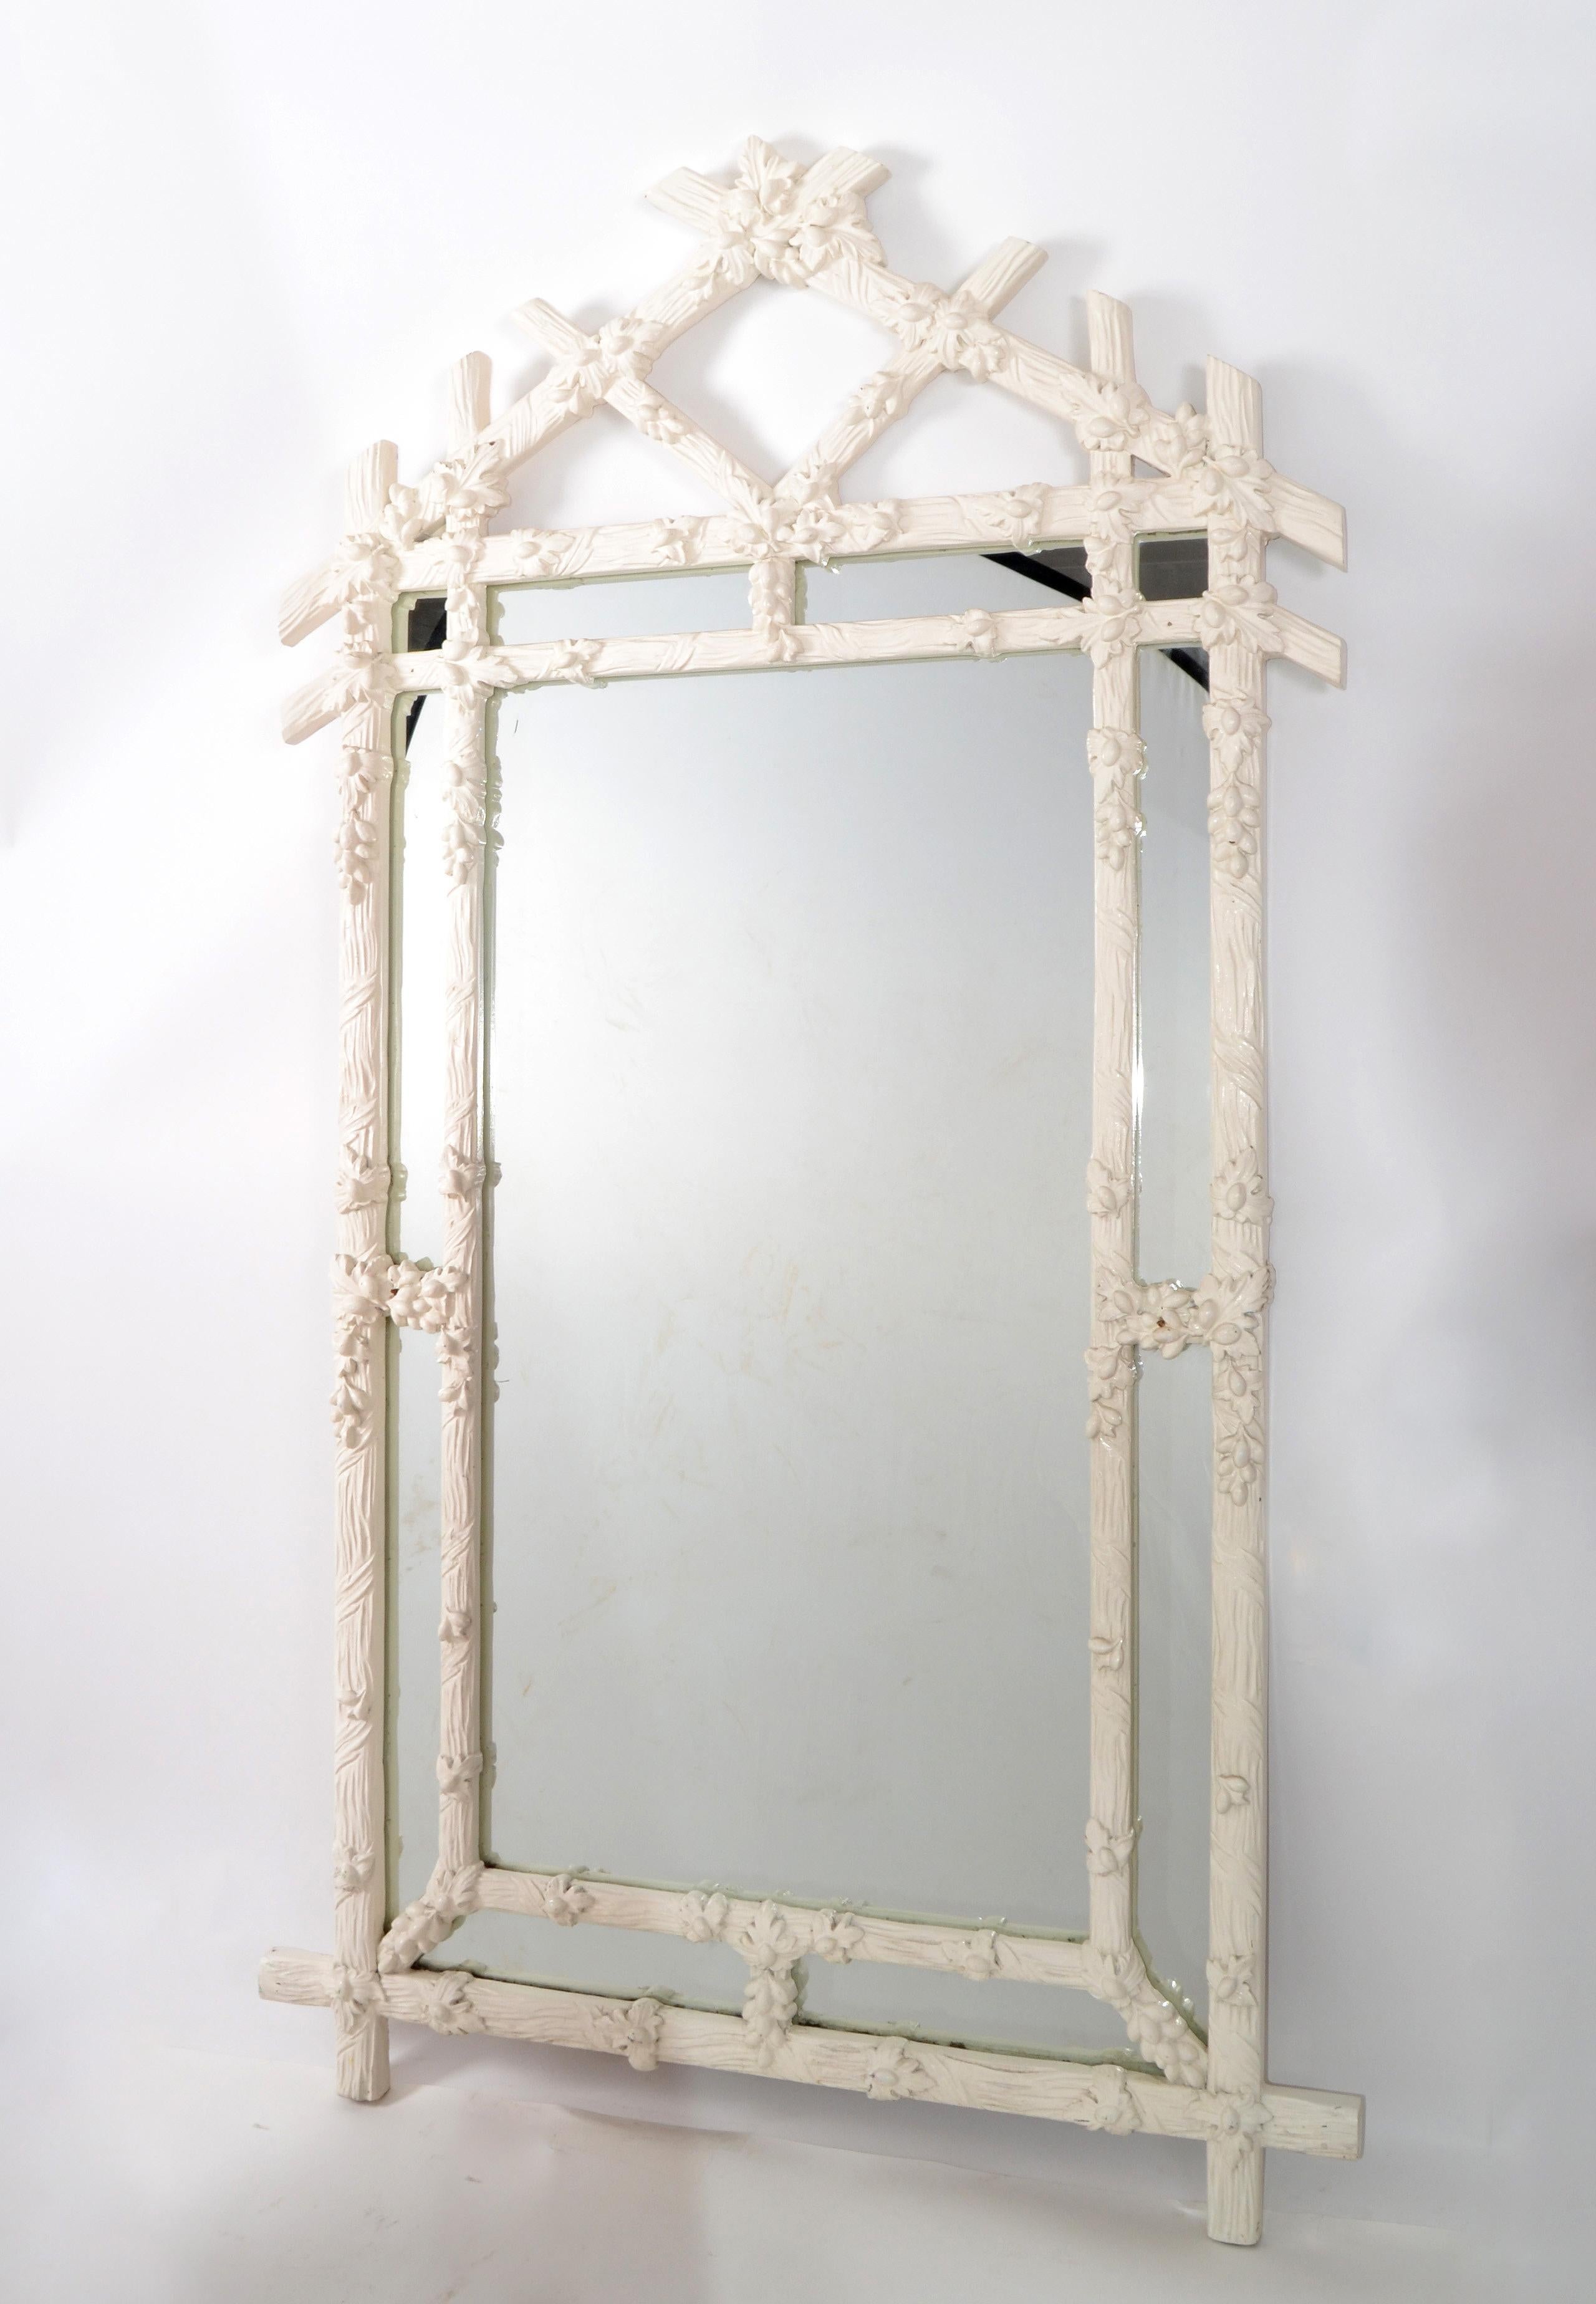 1970s Hollywood Regency Faux-Bois antique white hand carved wood wall mirror made in Italy for Gampel-Stoll.
Heavy Gothic style shape and it can be securely hung.
In original very good vintage condition.
Mirror size: 27 x 46 inches.